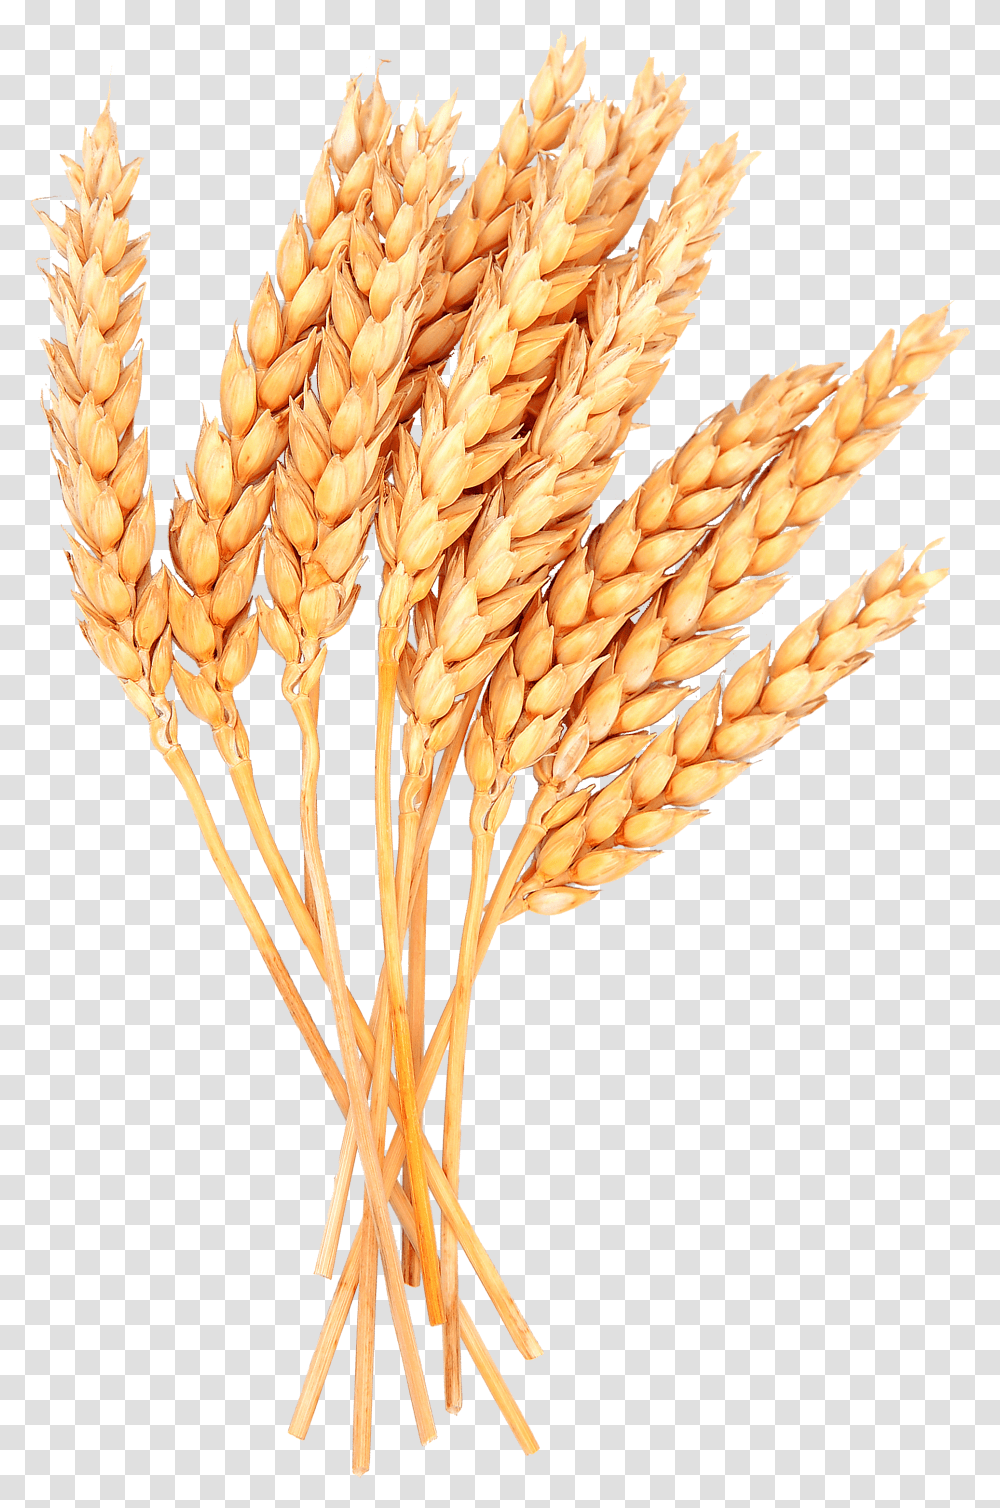 Wheat Image Sheaf Of Wheat Transparent Png